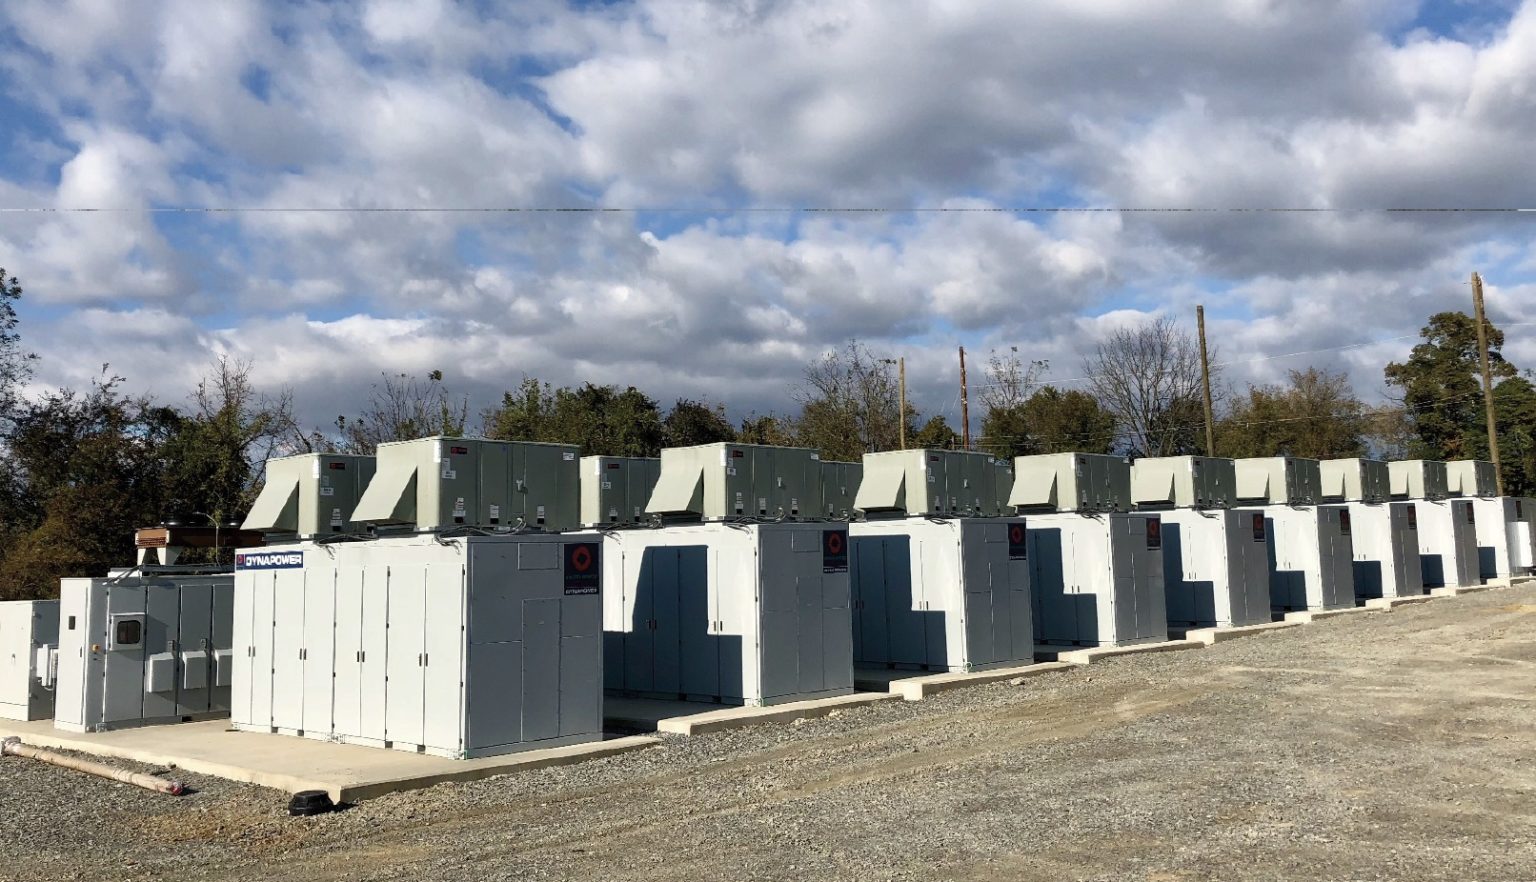 Dynapower energy storage systems in a row